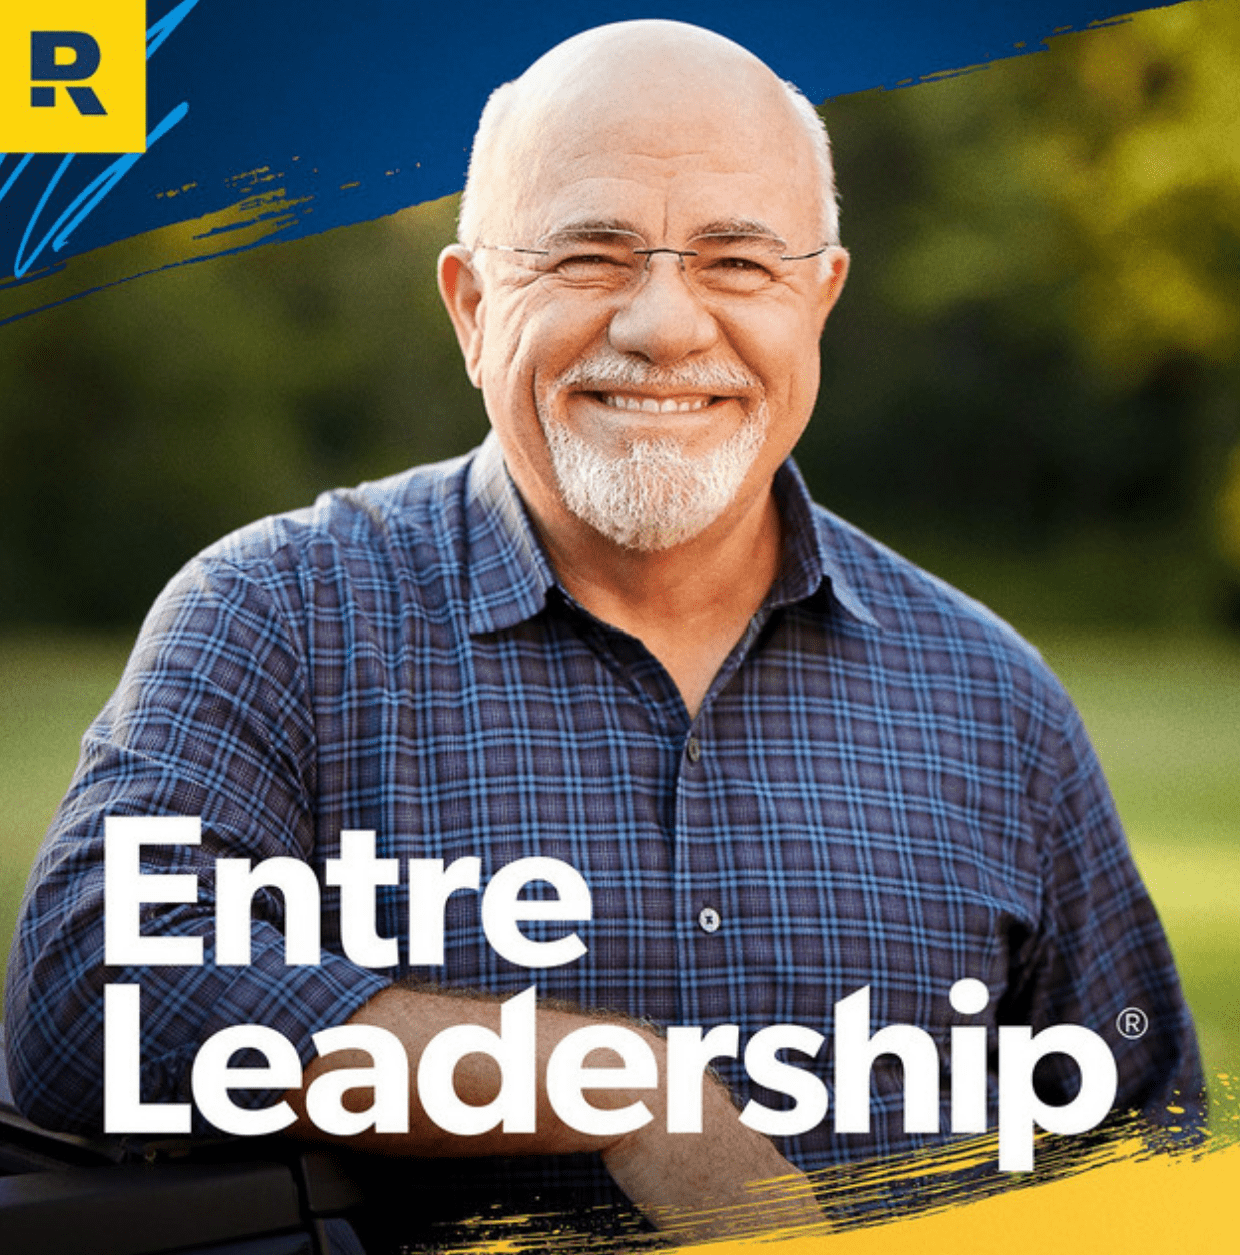 The EntreLeadership podcast cover